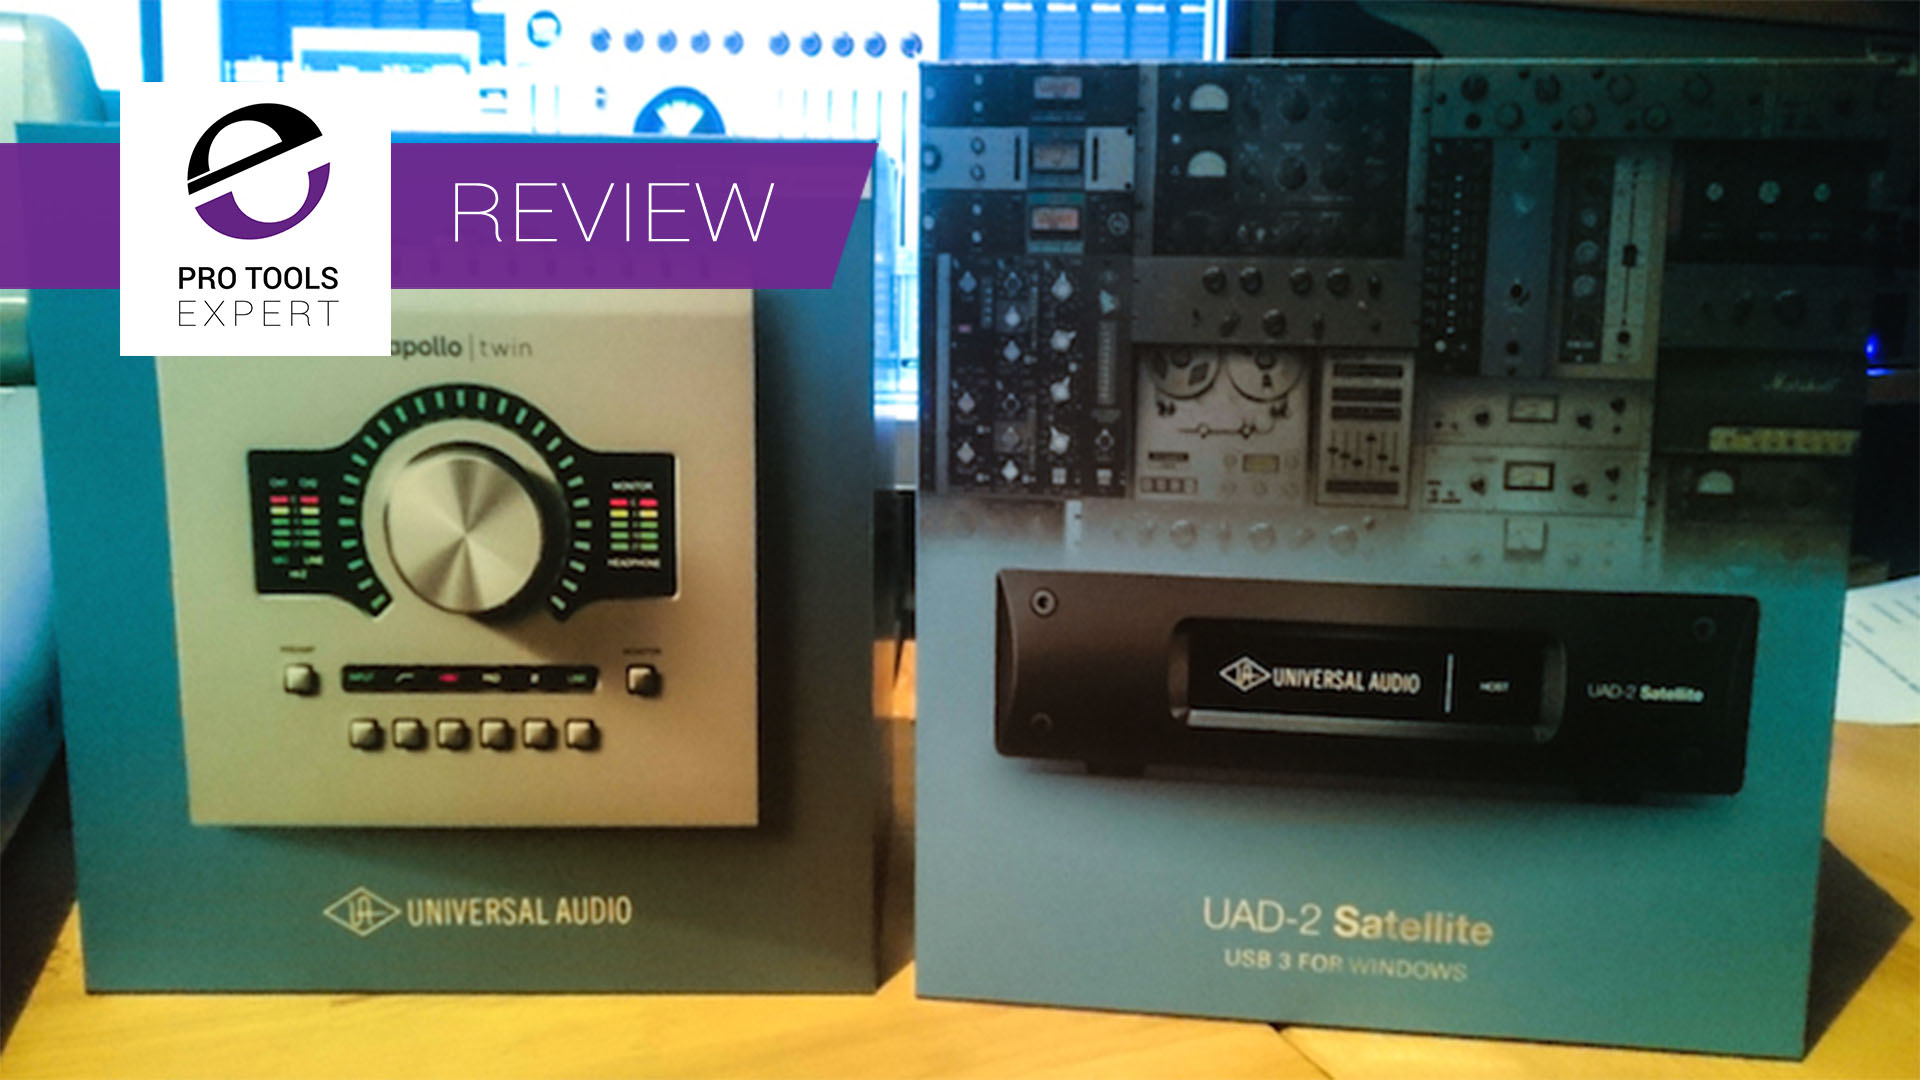 Review - Universal Audio Apollo And Satellite Octo USB On Windows | Pro Tools - The leading Pro Tools users